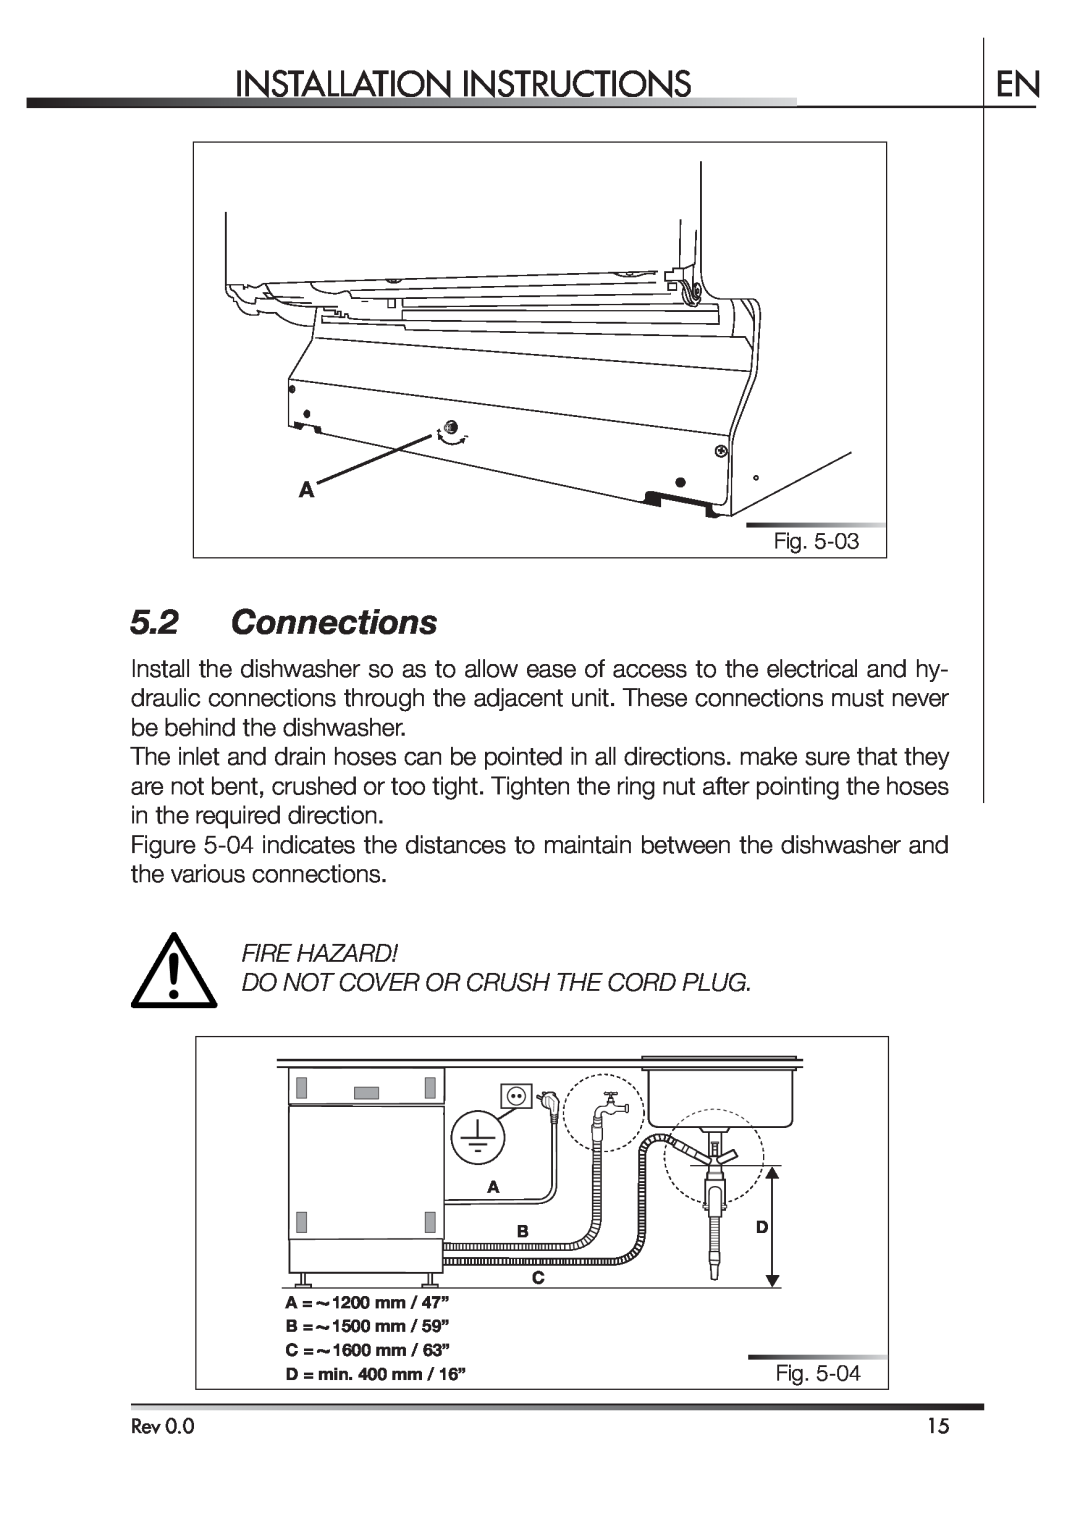 Smeg STA4645 instruction manual Connections, Installation Instructions, Fire Hazard Do Not Cover Or Crush The Cord Plug 